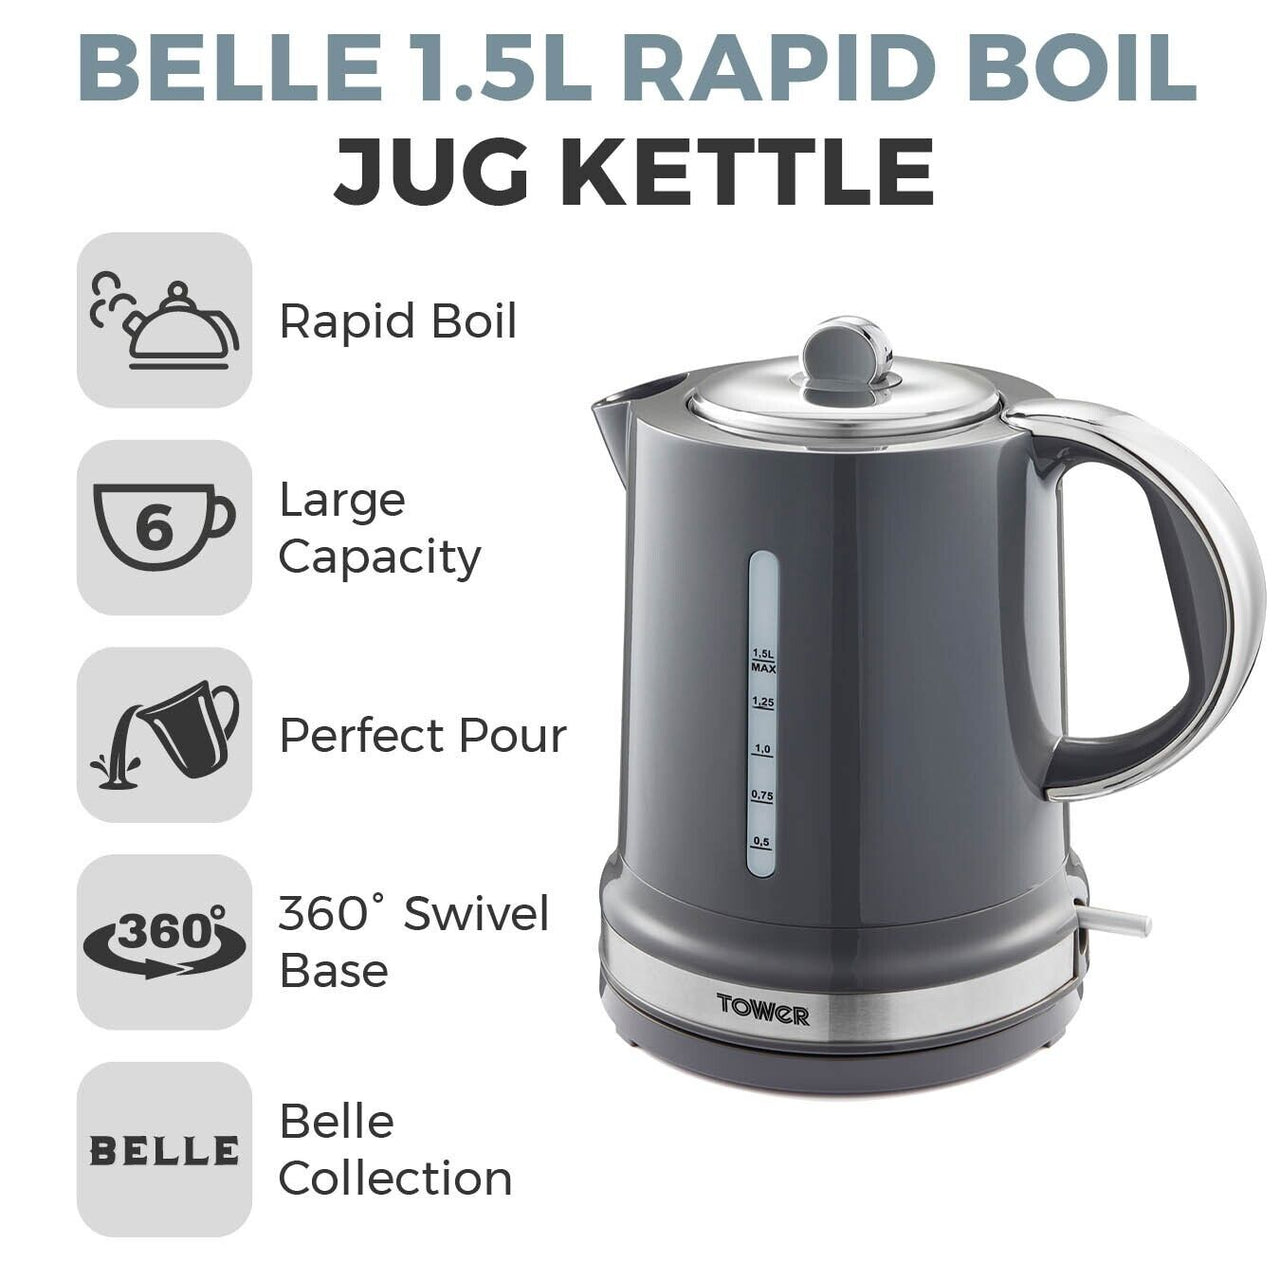 Tower Belle Kettle 2 Slice Toaster & Tea Coffee & Sugar Canisters Set in Graphite Grey